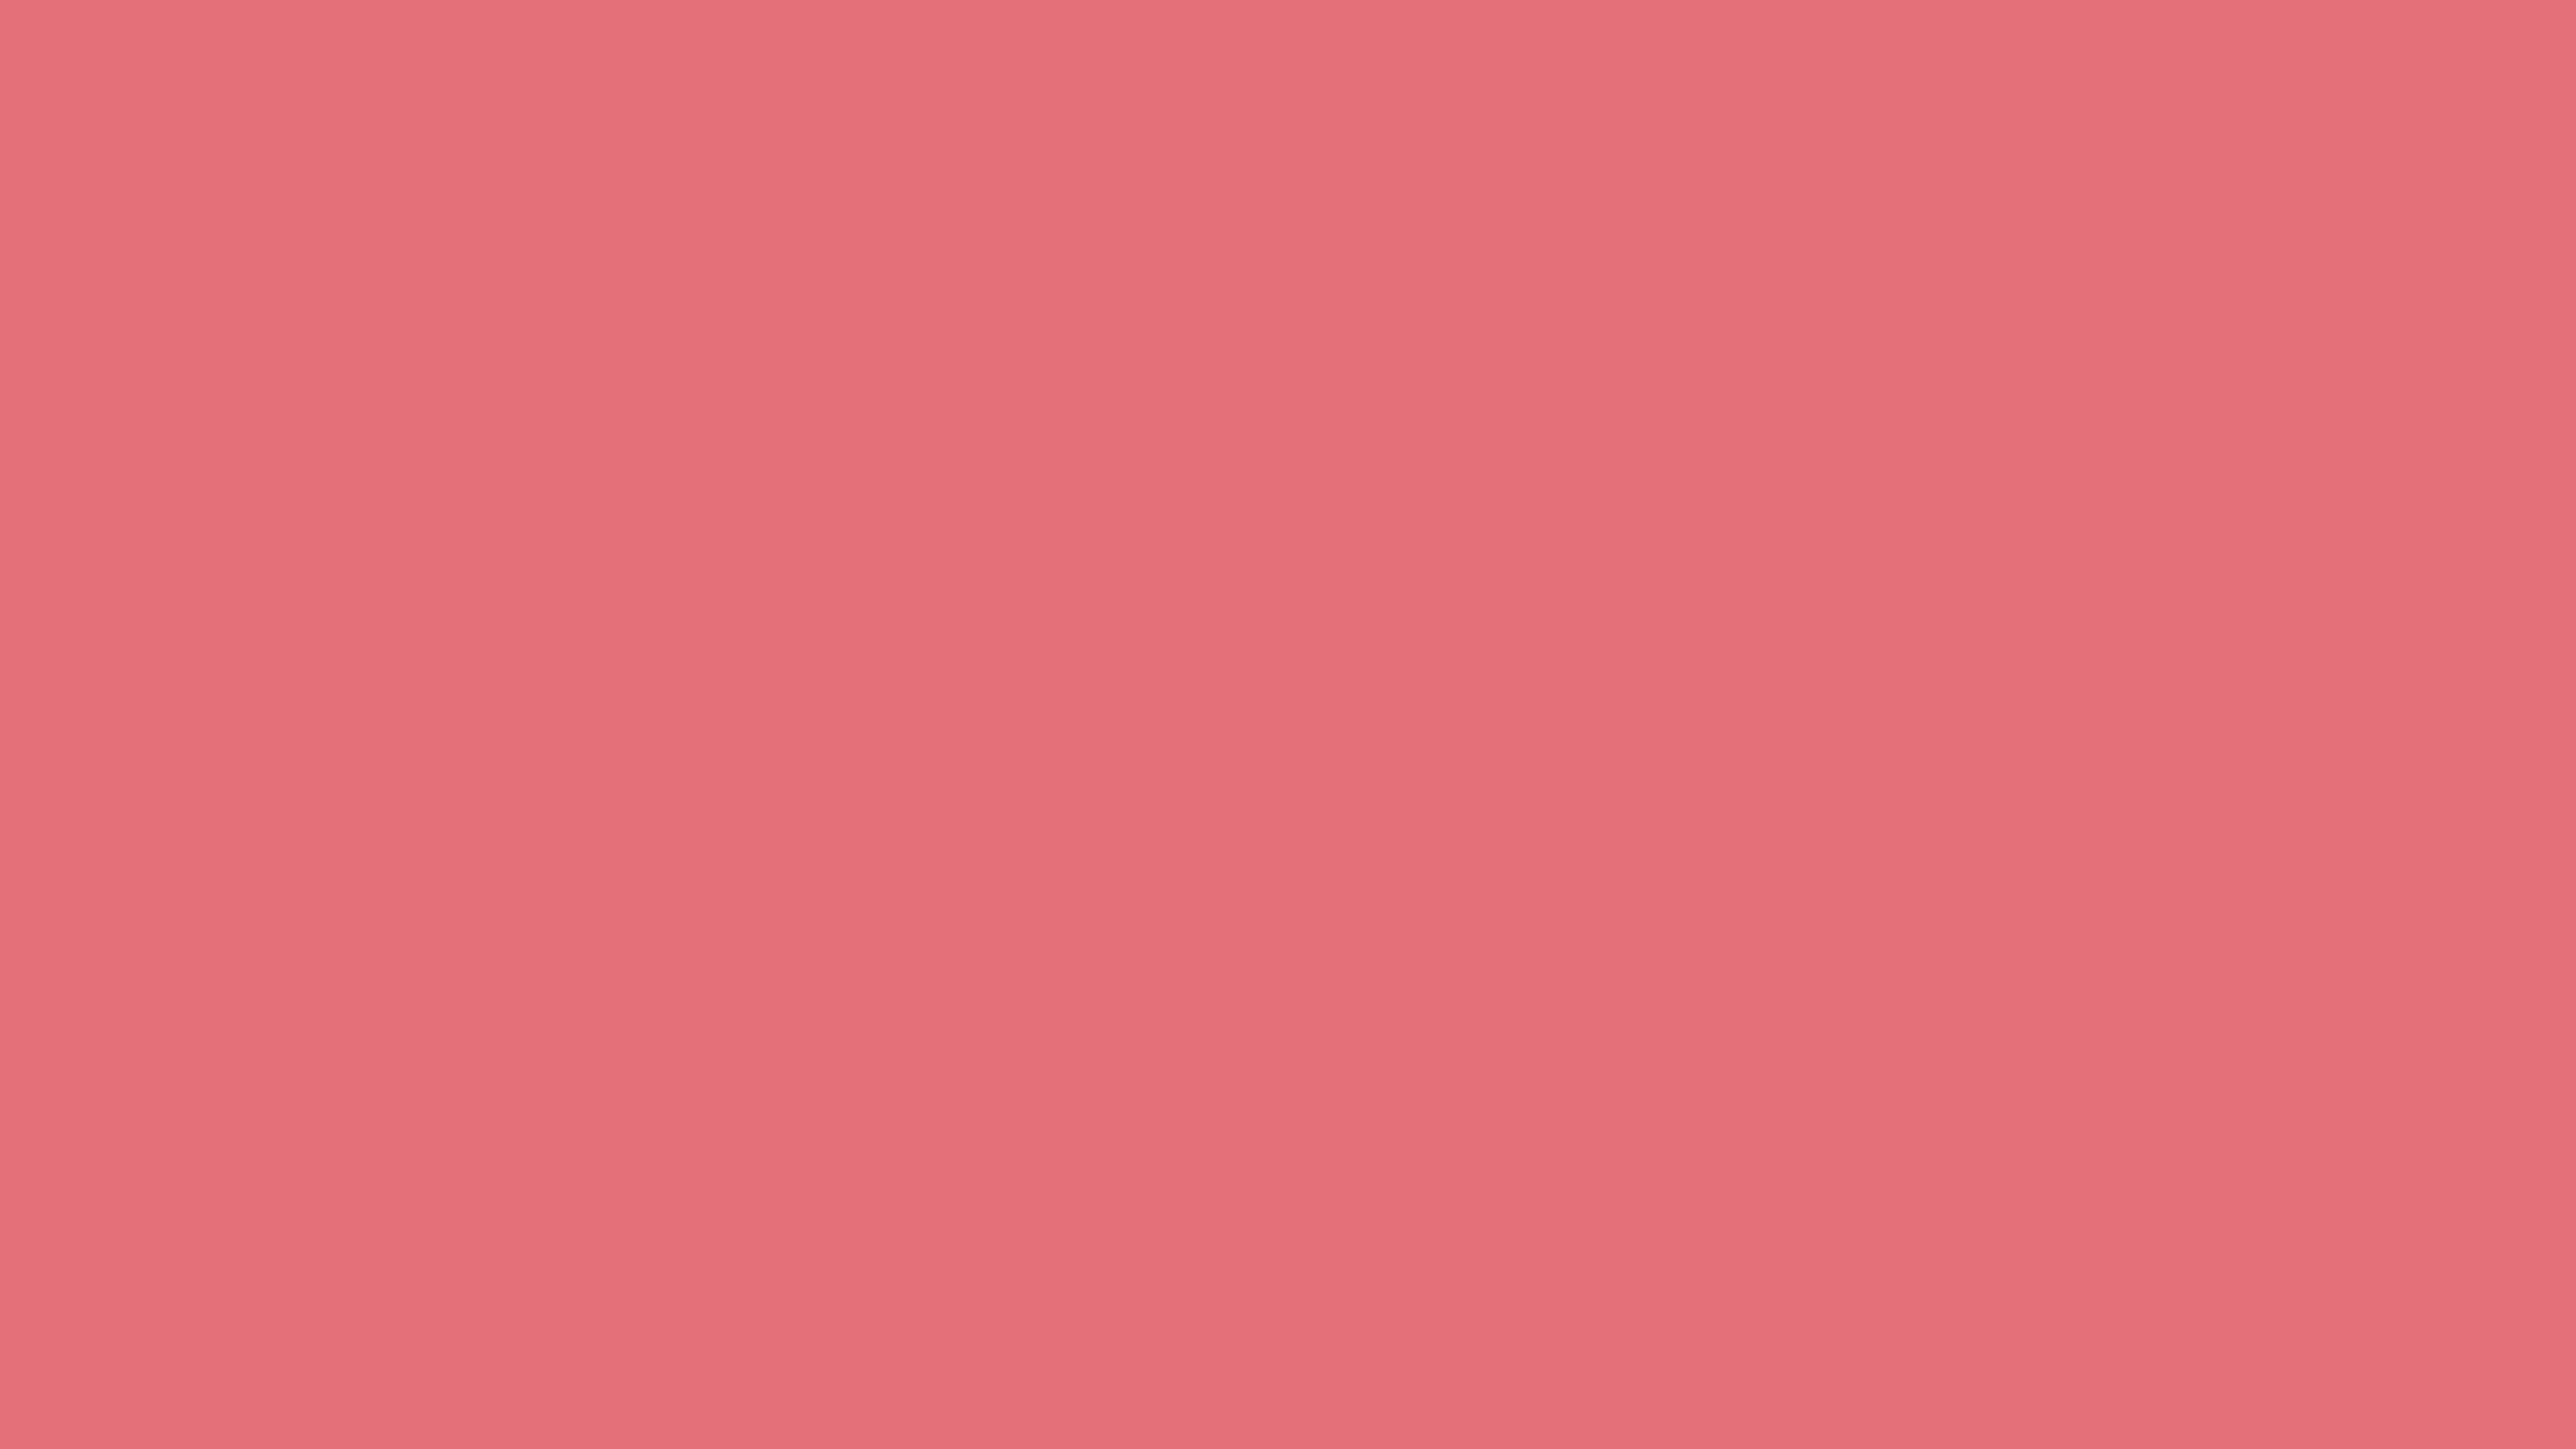 7680x4320 Tango Pink Solid Color Background